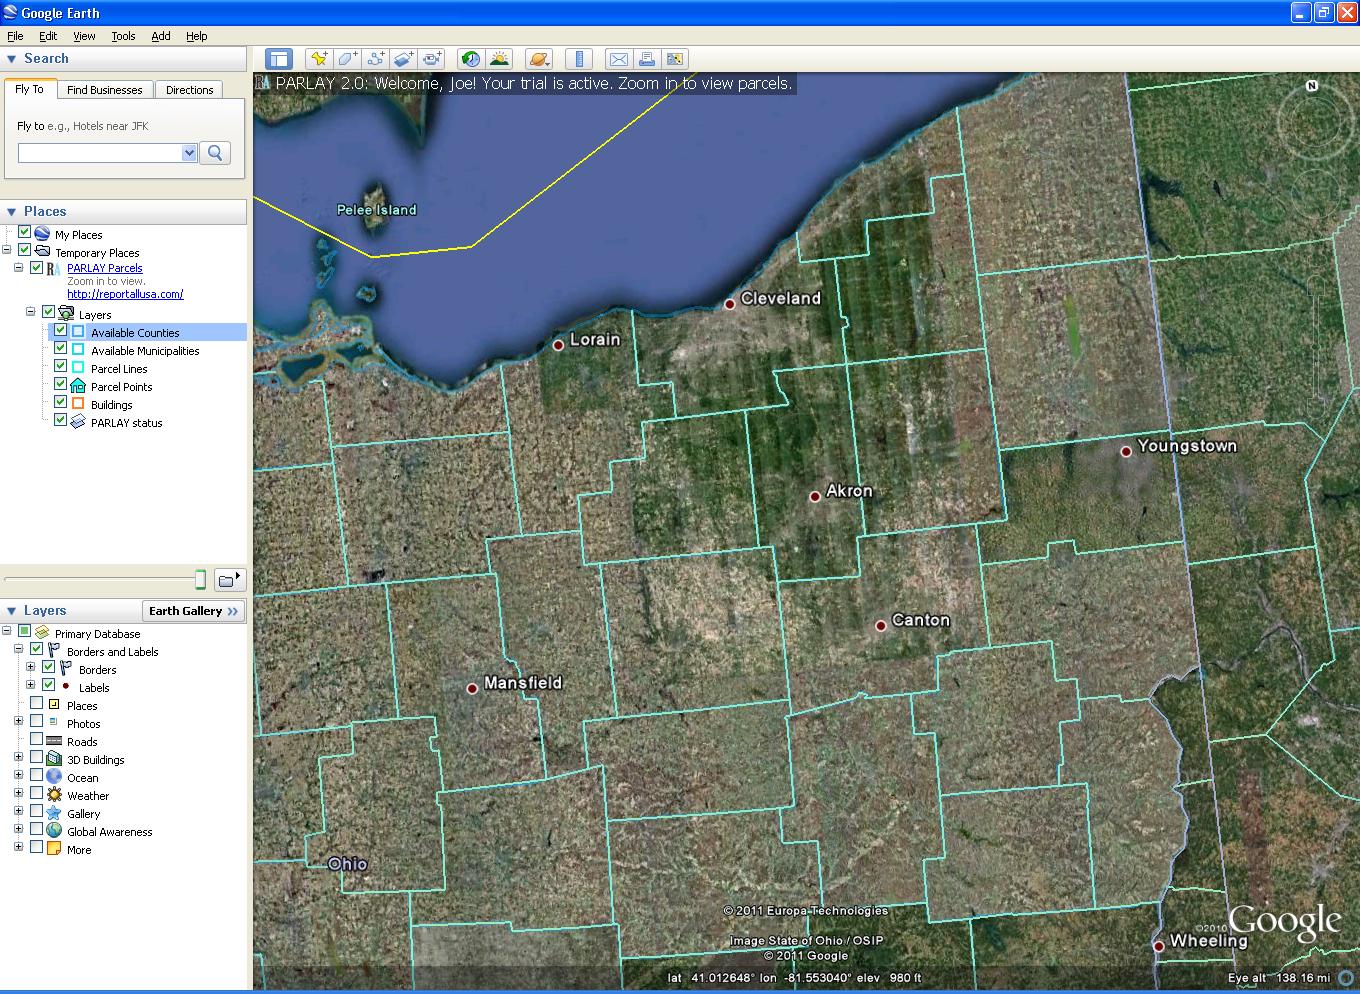 How To See Property Boundaries On Google Earth - The Earth Images